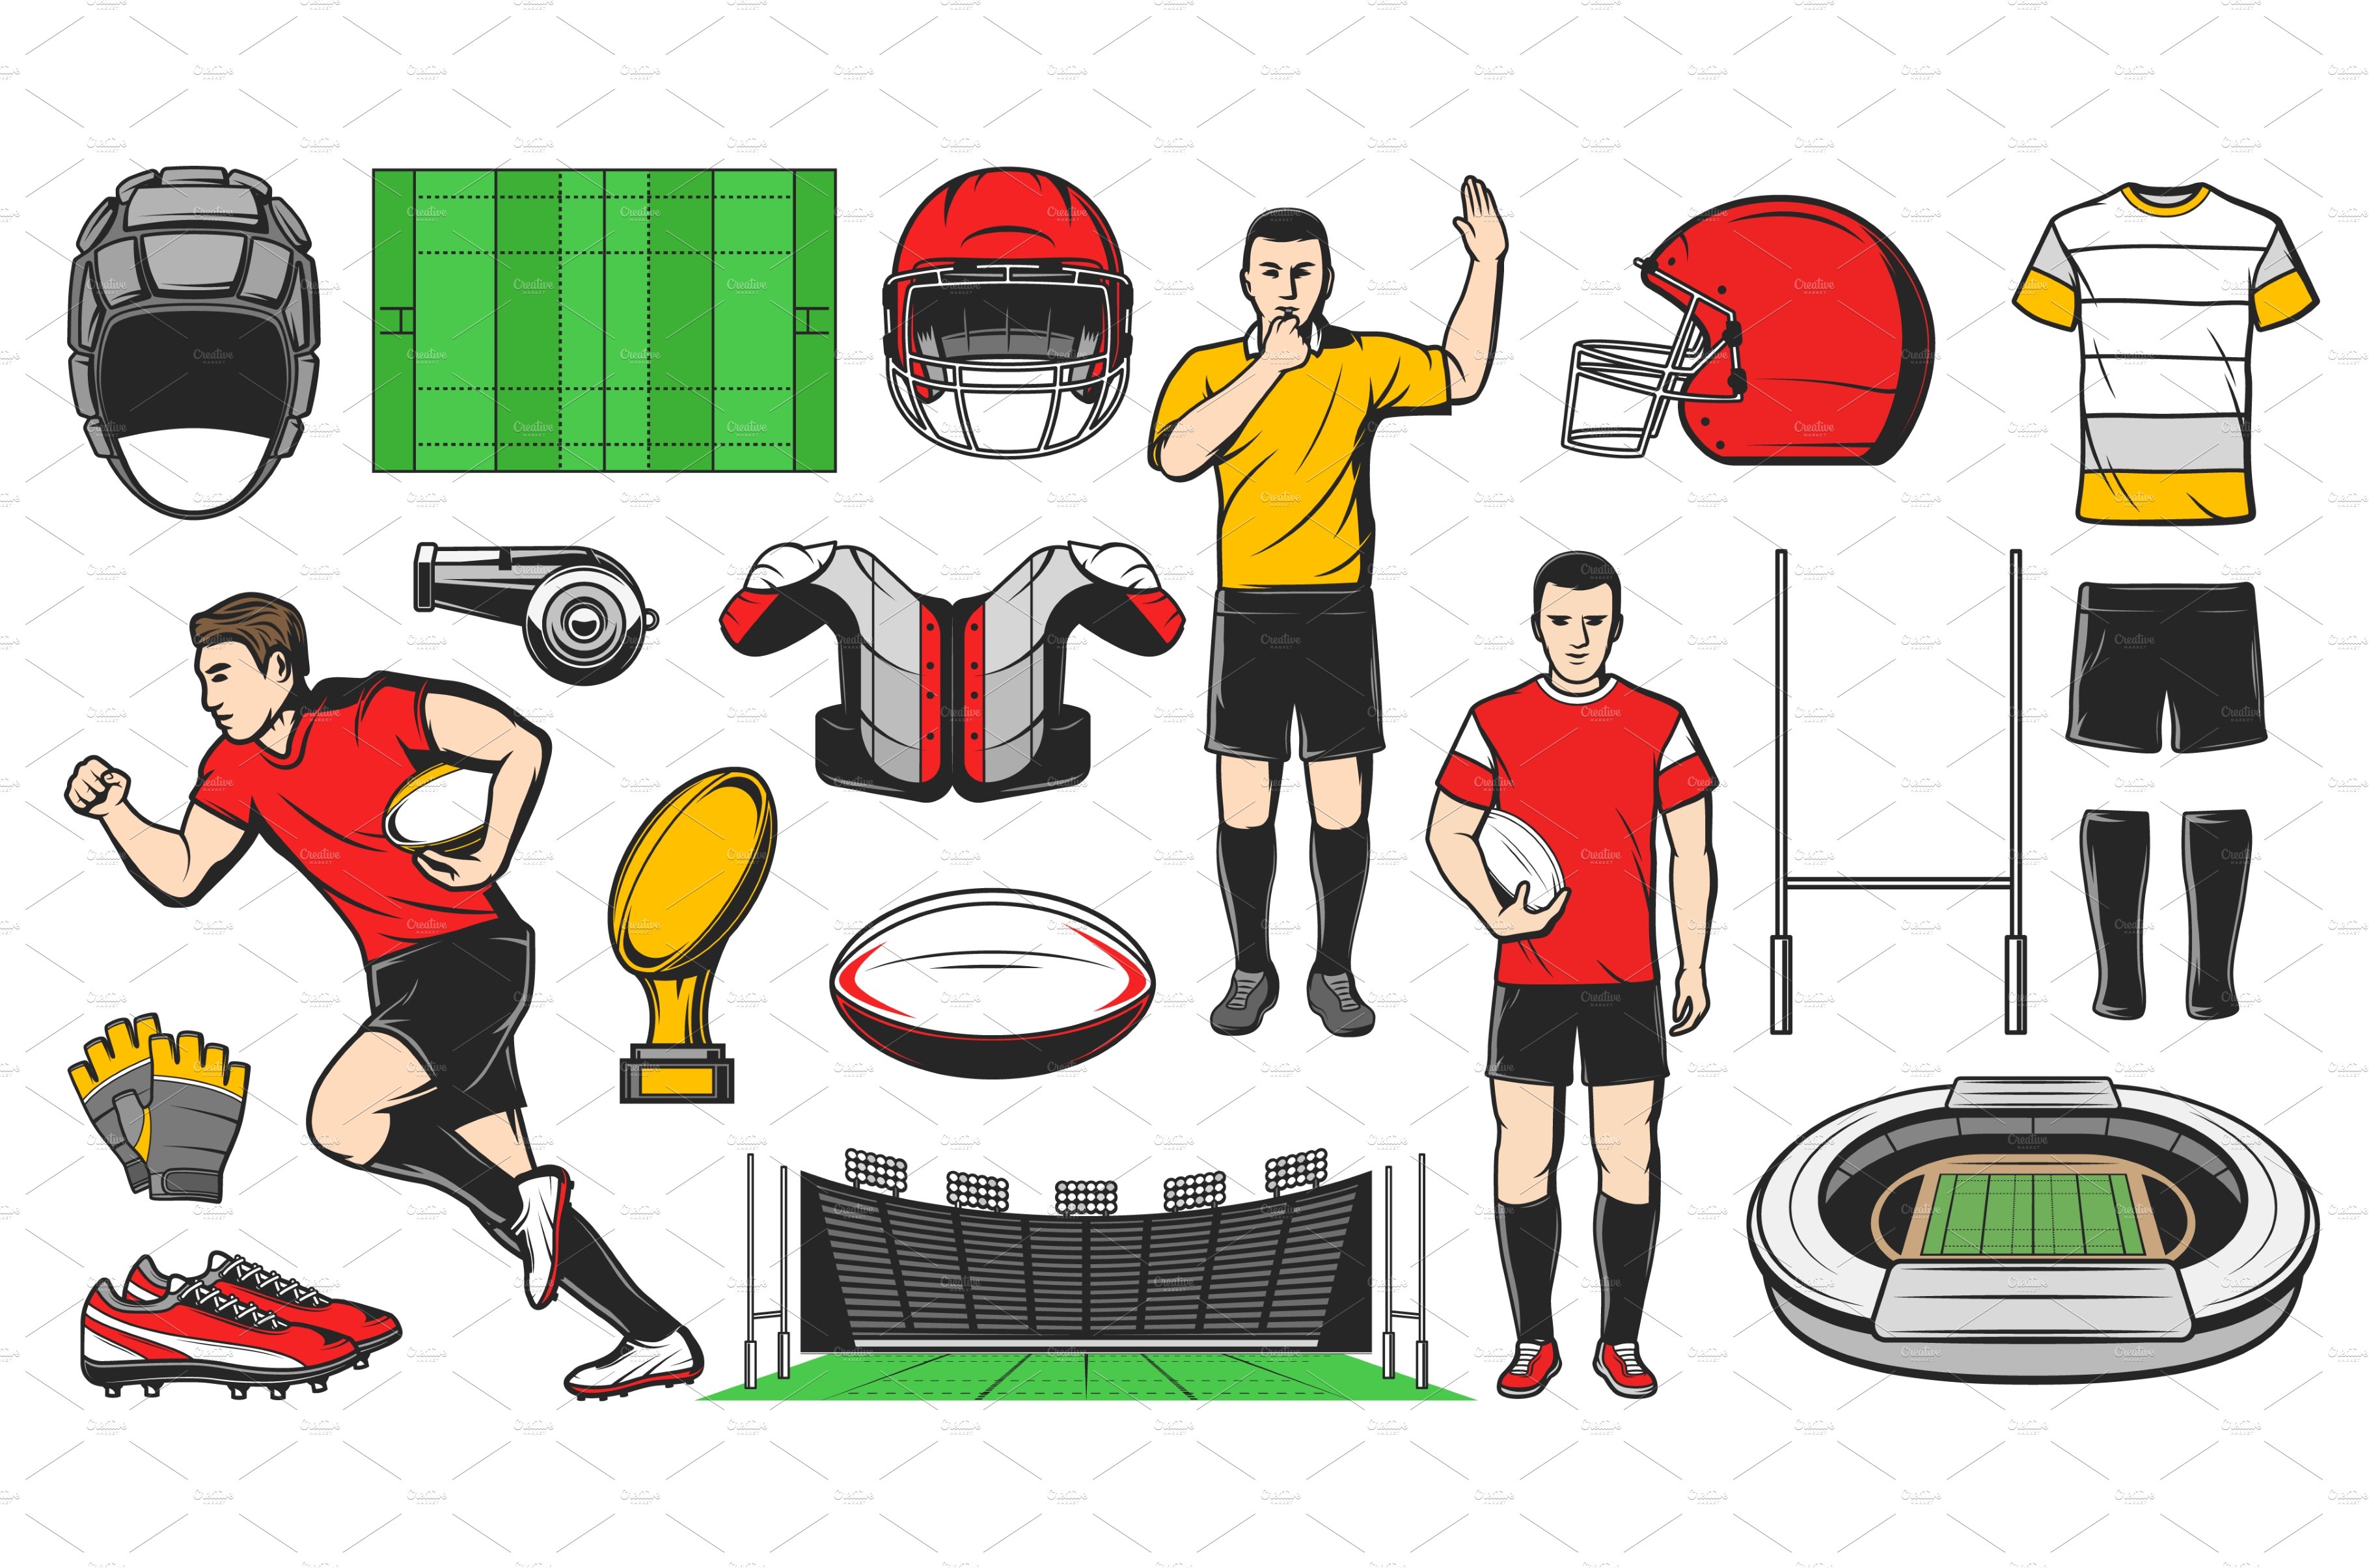 Rugby sport items and players cover image.